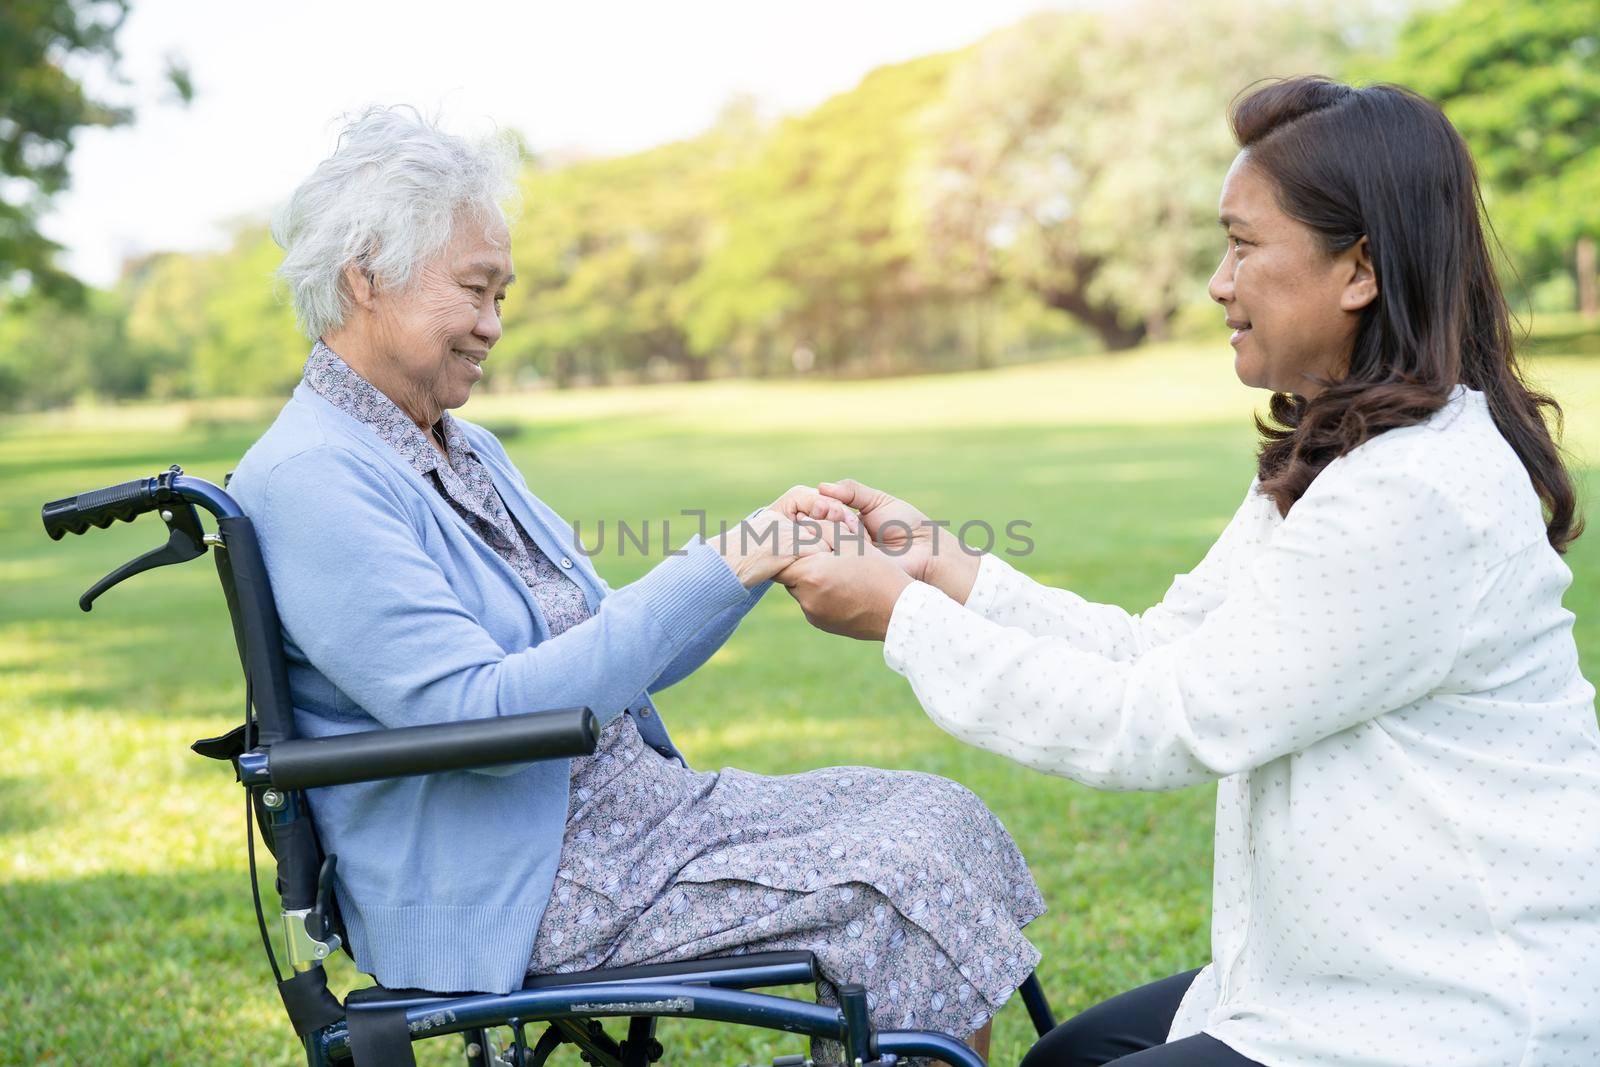 Holding hands Asian senior or elderly old lady woman patient with love, care, encourage and empathy at nursing hospital ward, healthy strong medical concept